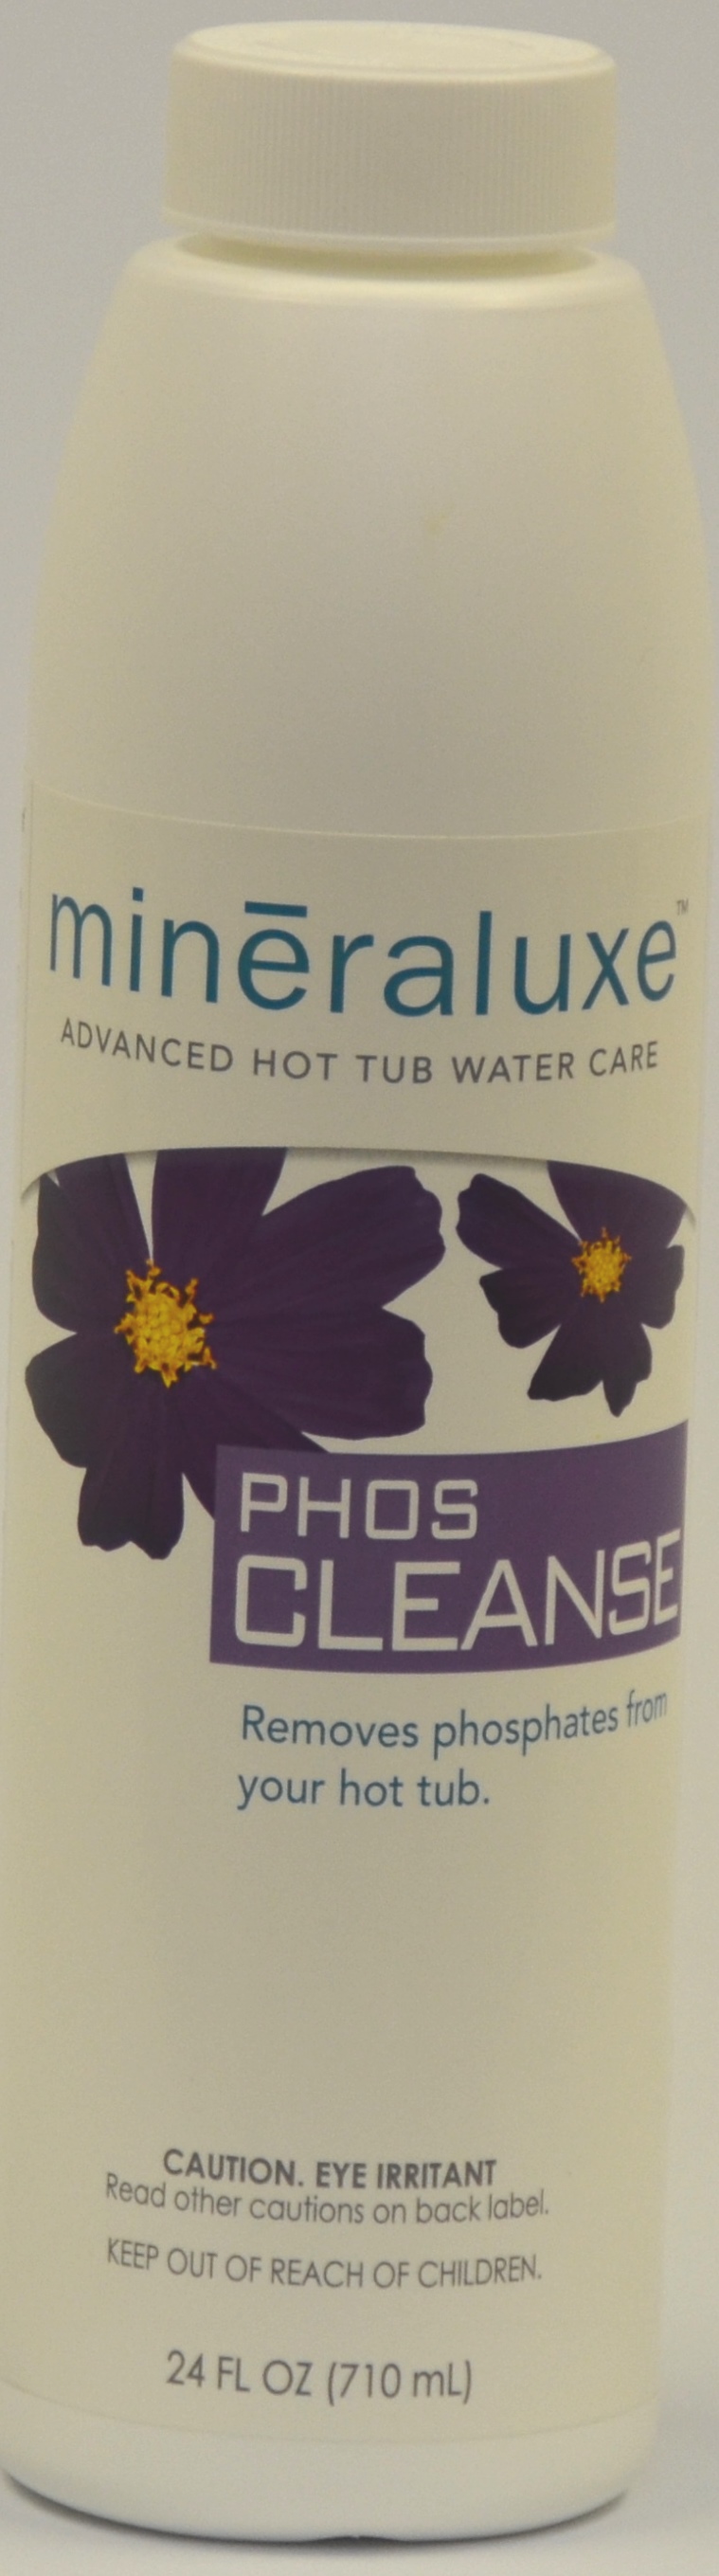 Mineraluxe Phos Cleanse 16 X 24 oz